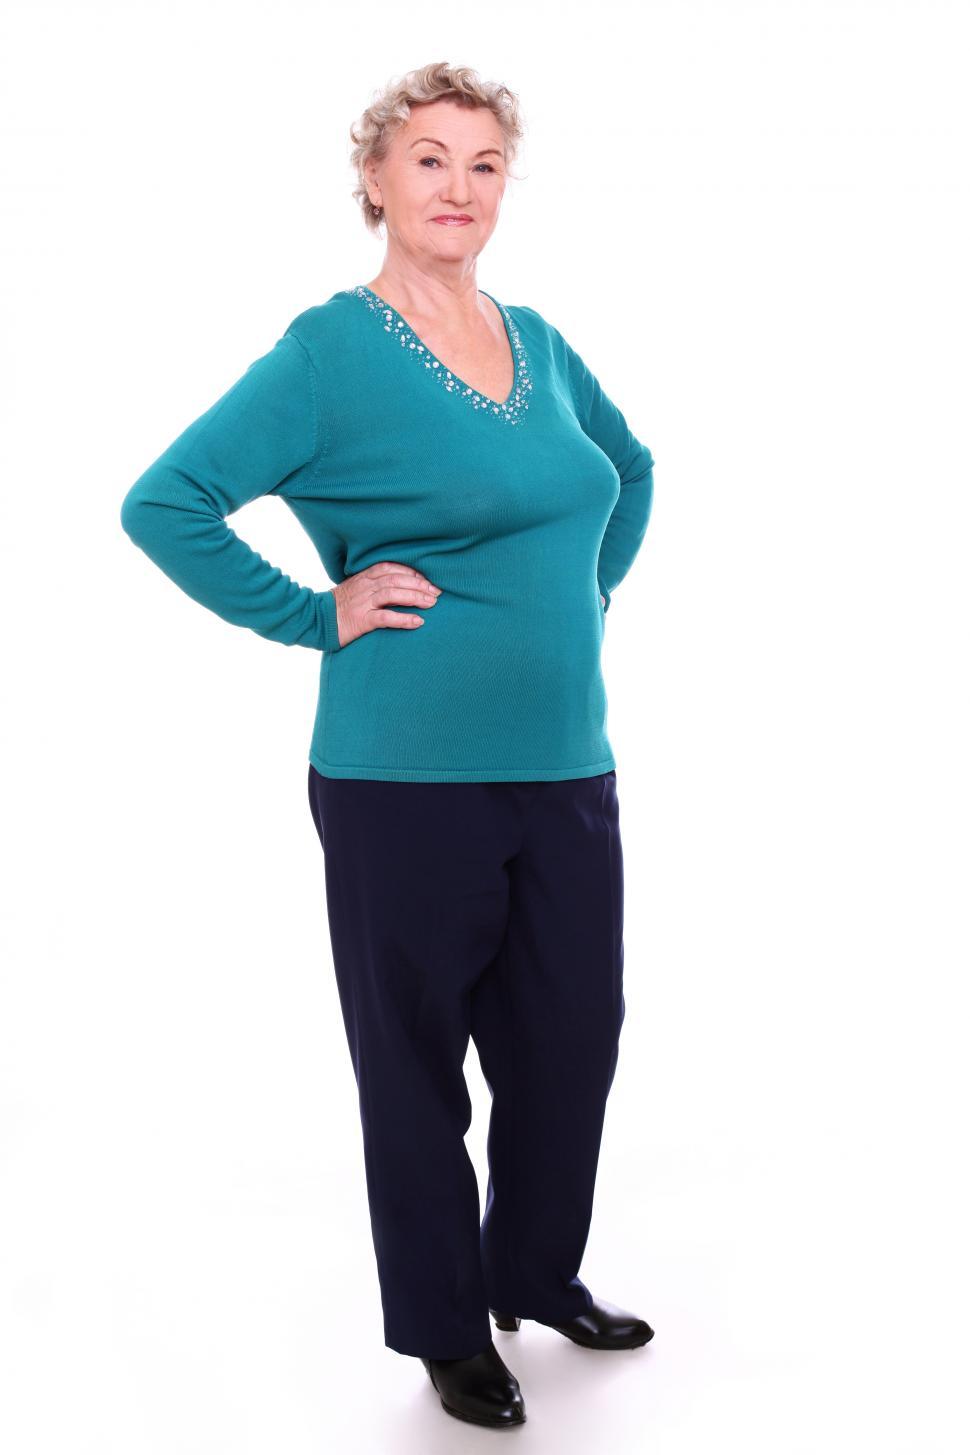 Free Image of Elderly woman standing, looking at the camera 